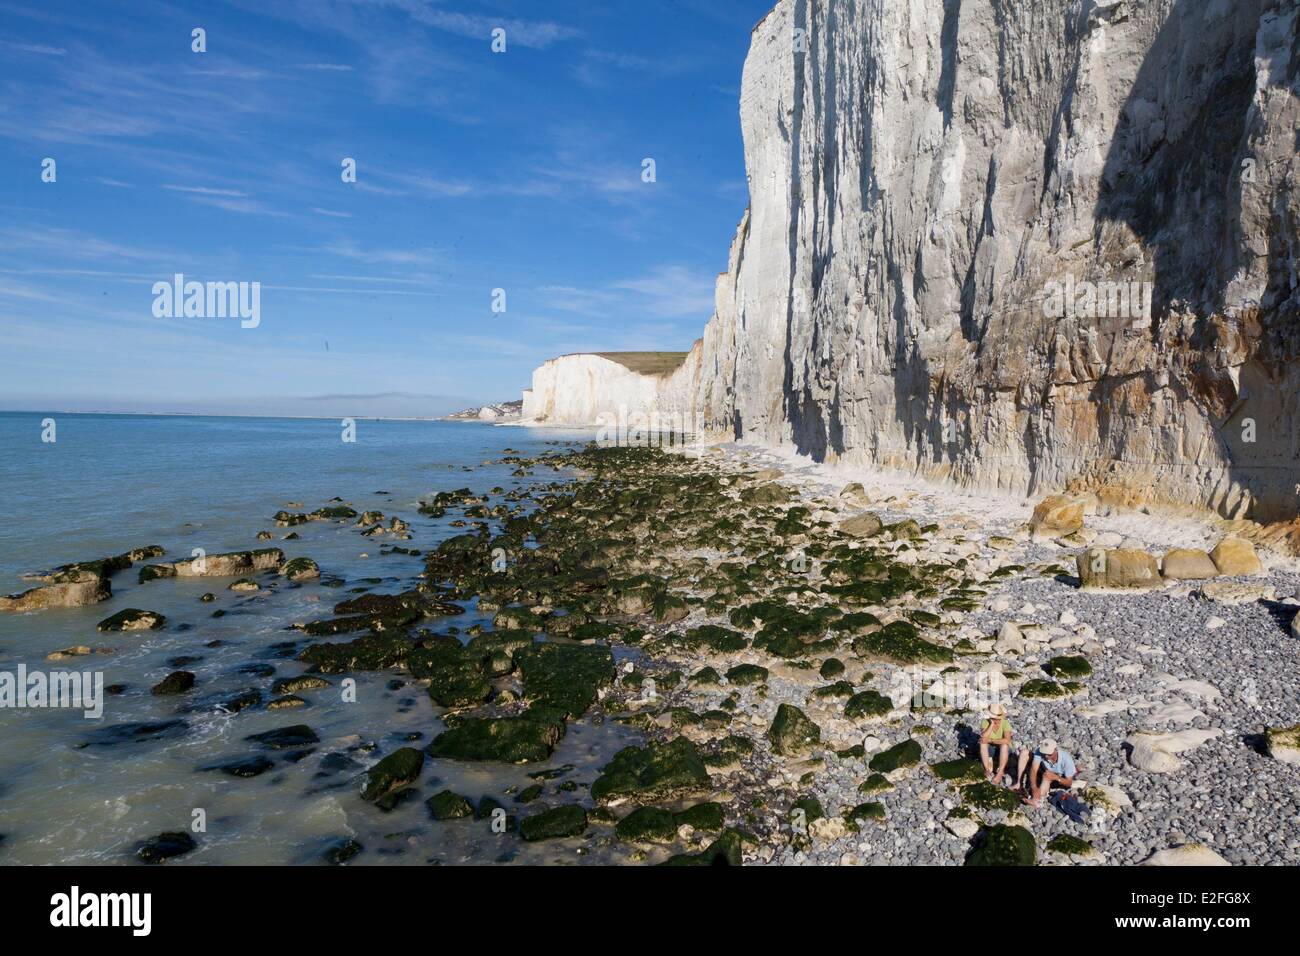 France, Somme, Ault, pebble beach at high tide at the foot of cliffs Stock Photo